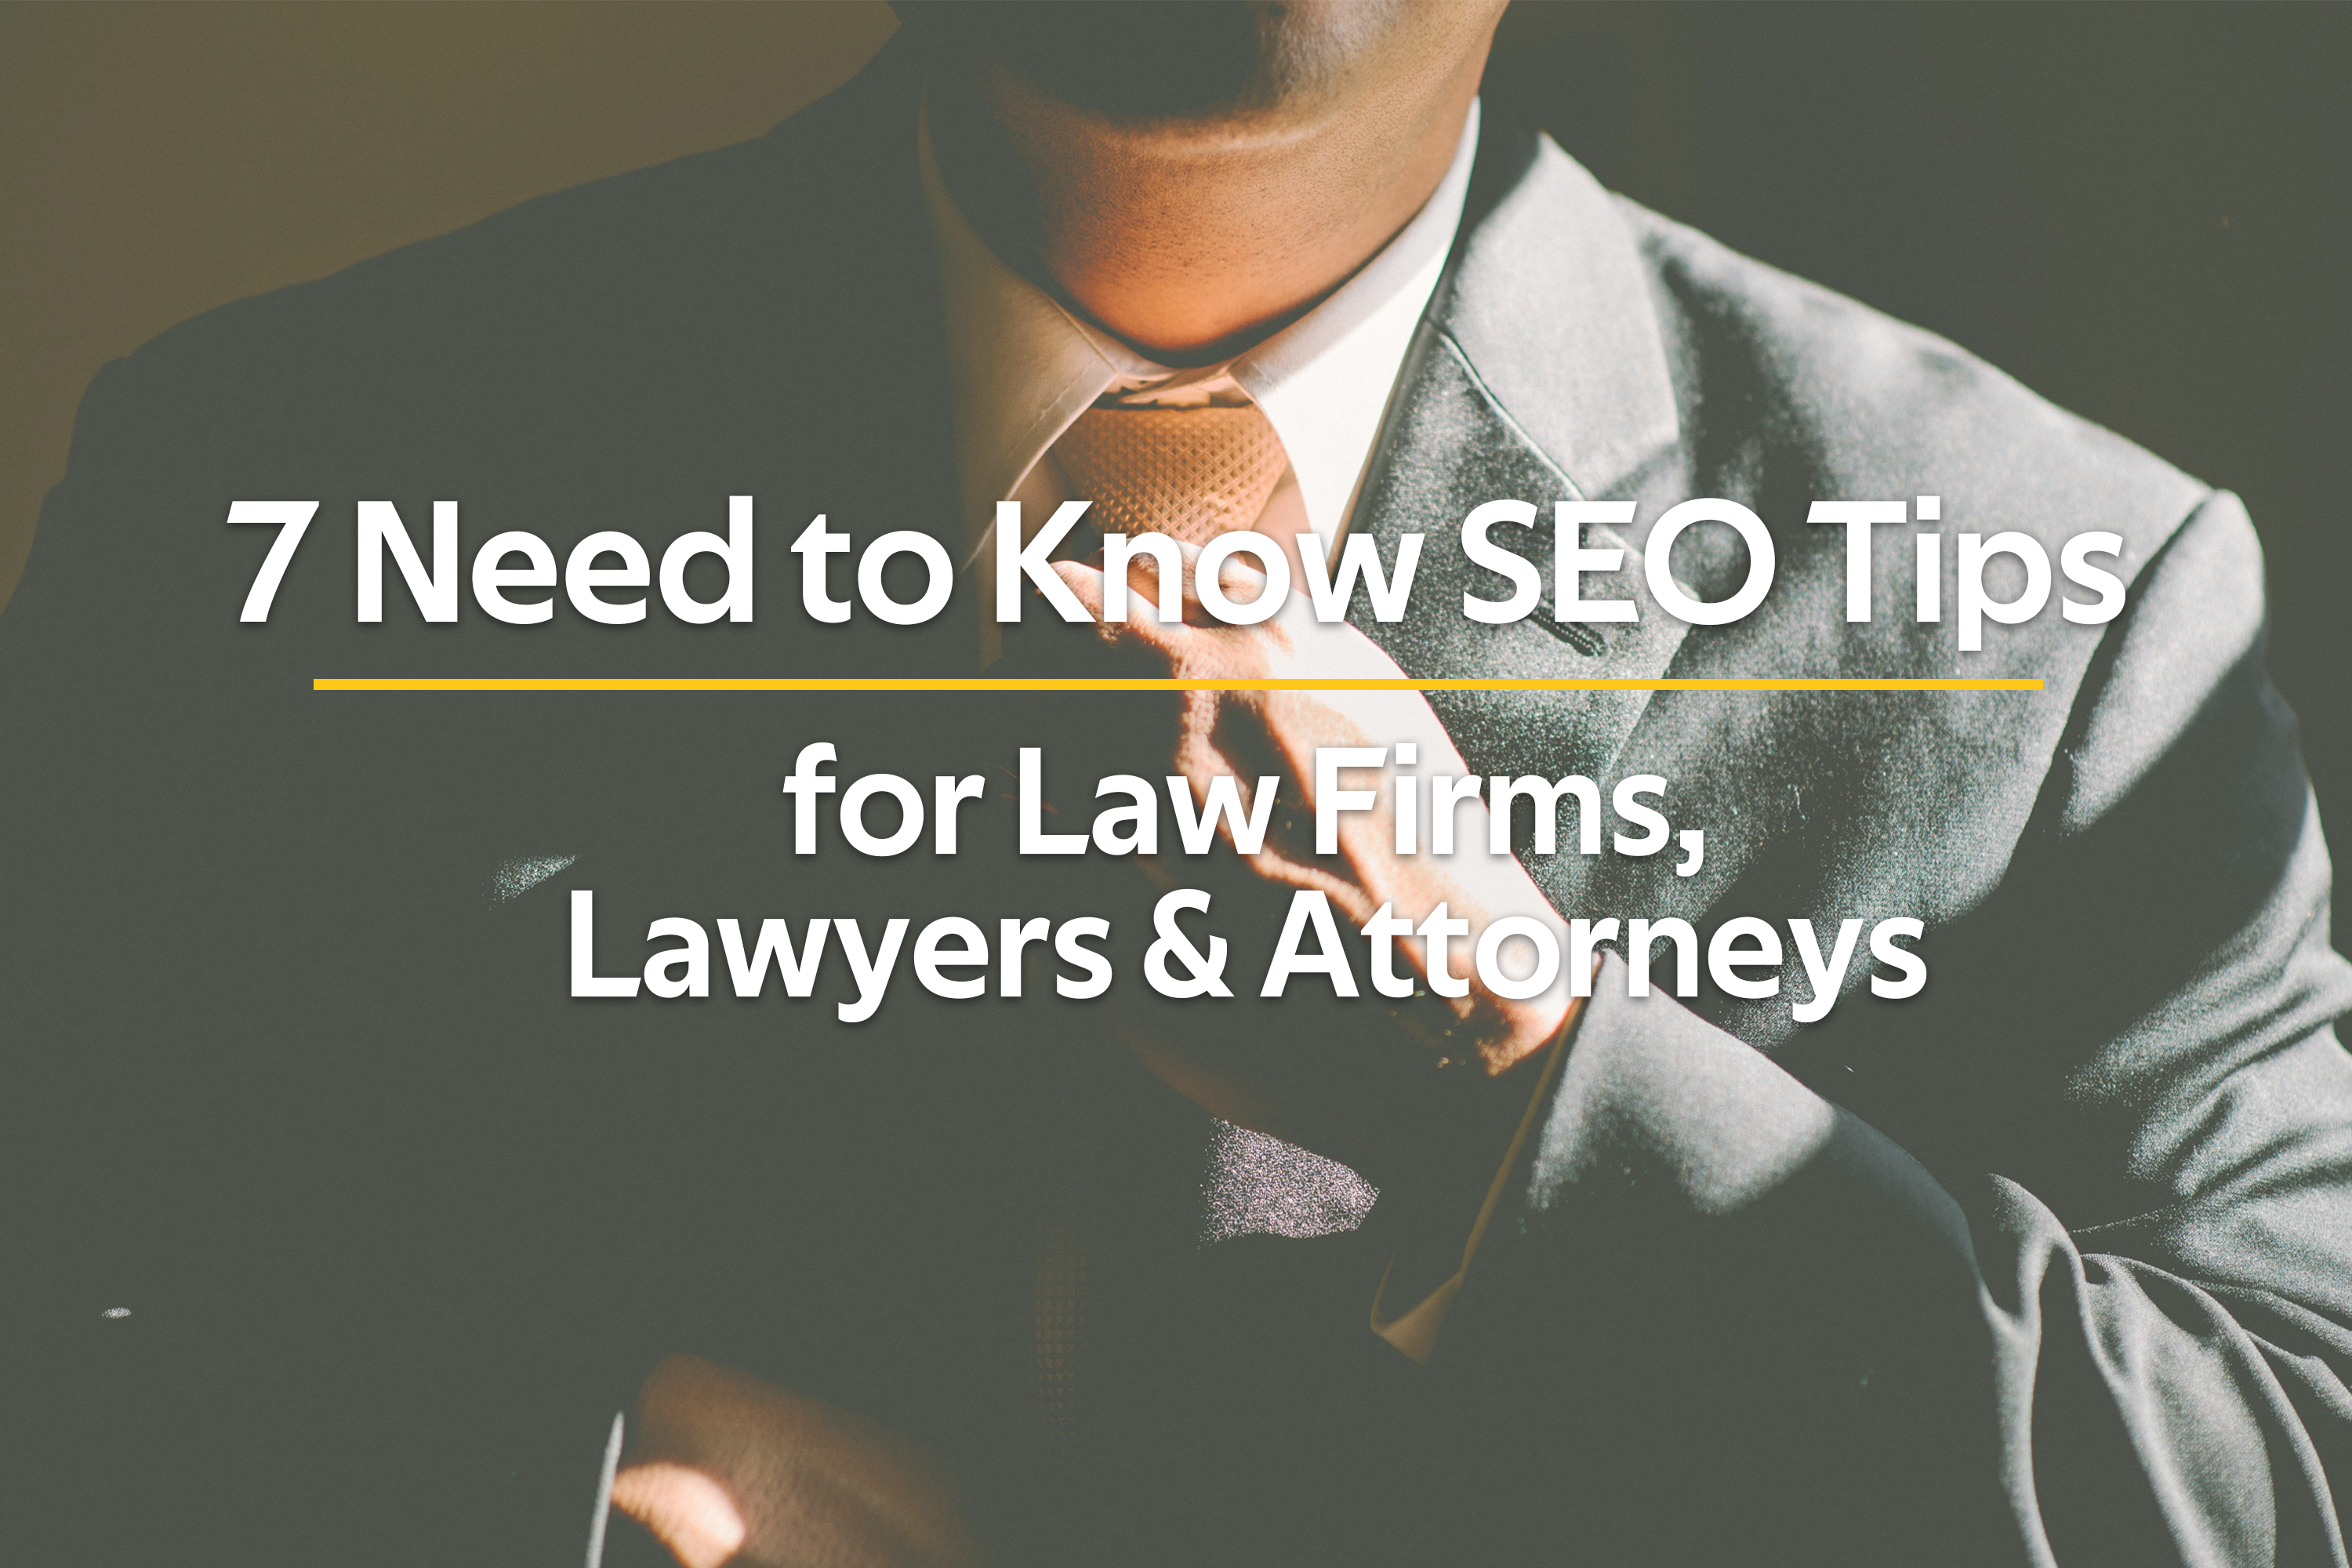 legal-seo-7-need-to-know-seo-tips-for-lawyers-law-firms-and-attorneys